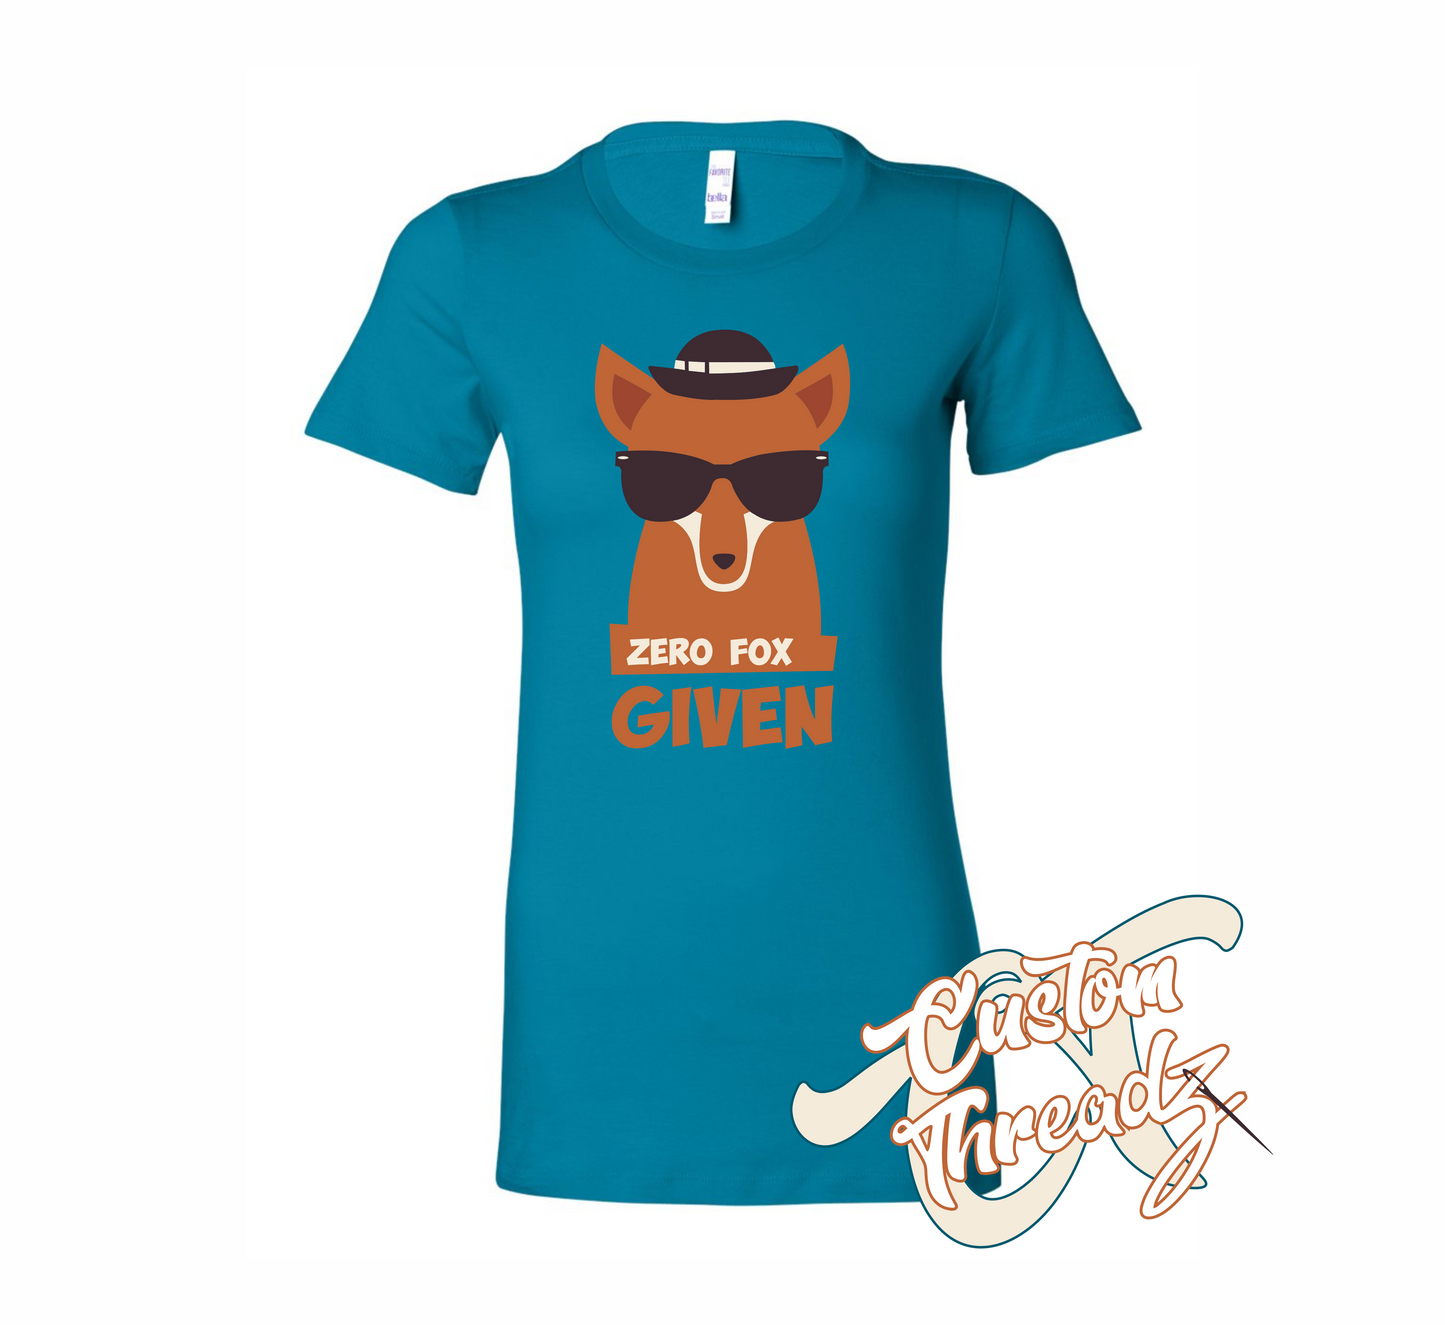 teal womens tee with zero fox given DTG printed design